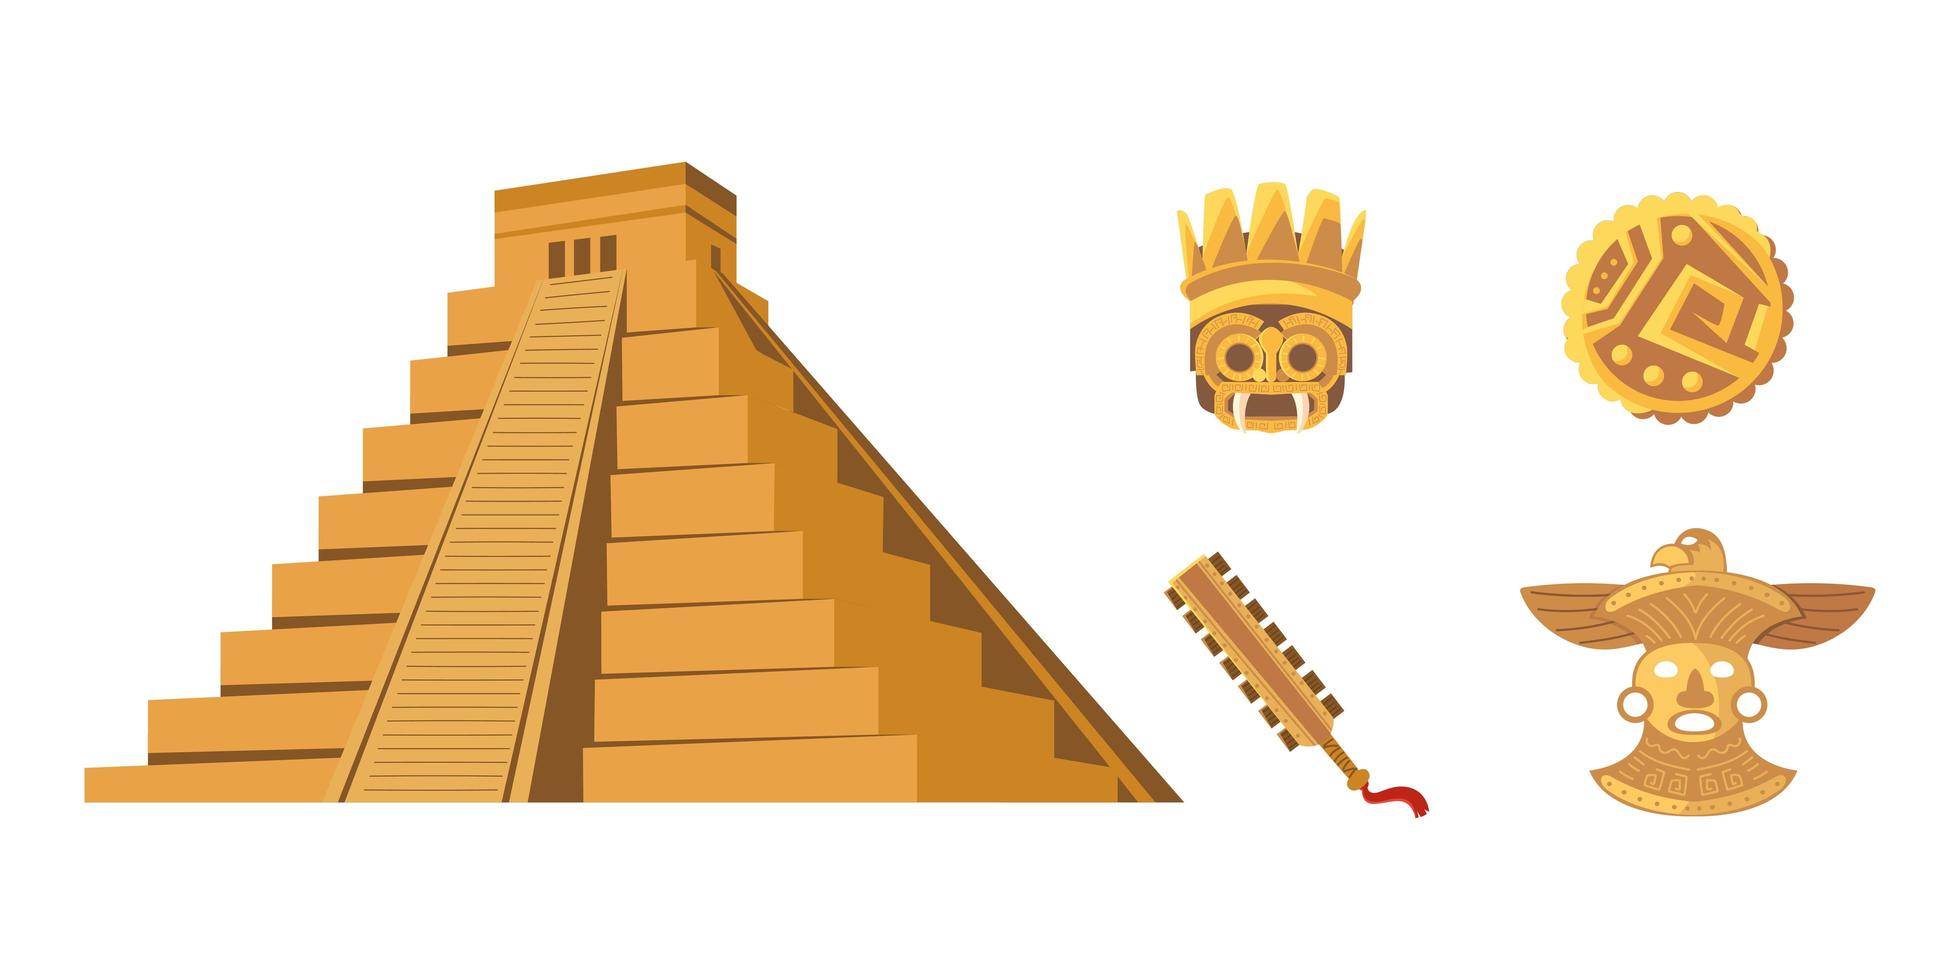 aztec pyramid weapon coin mask ornament icons vector